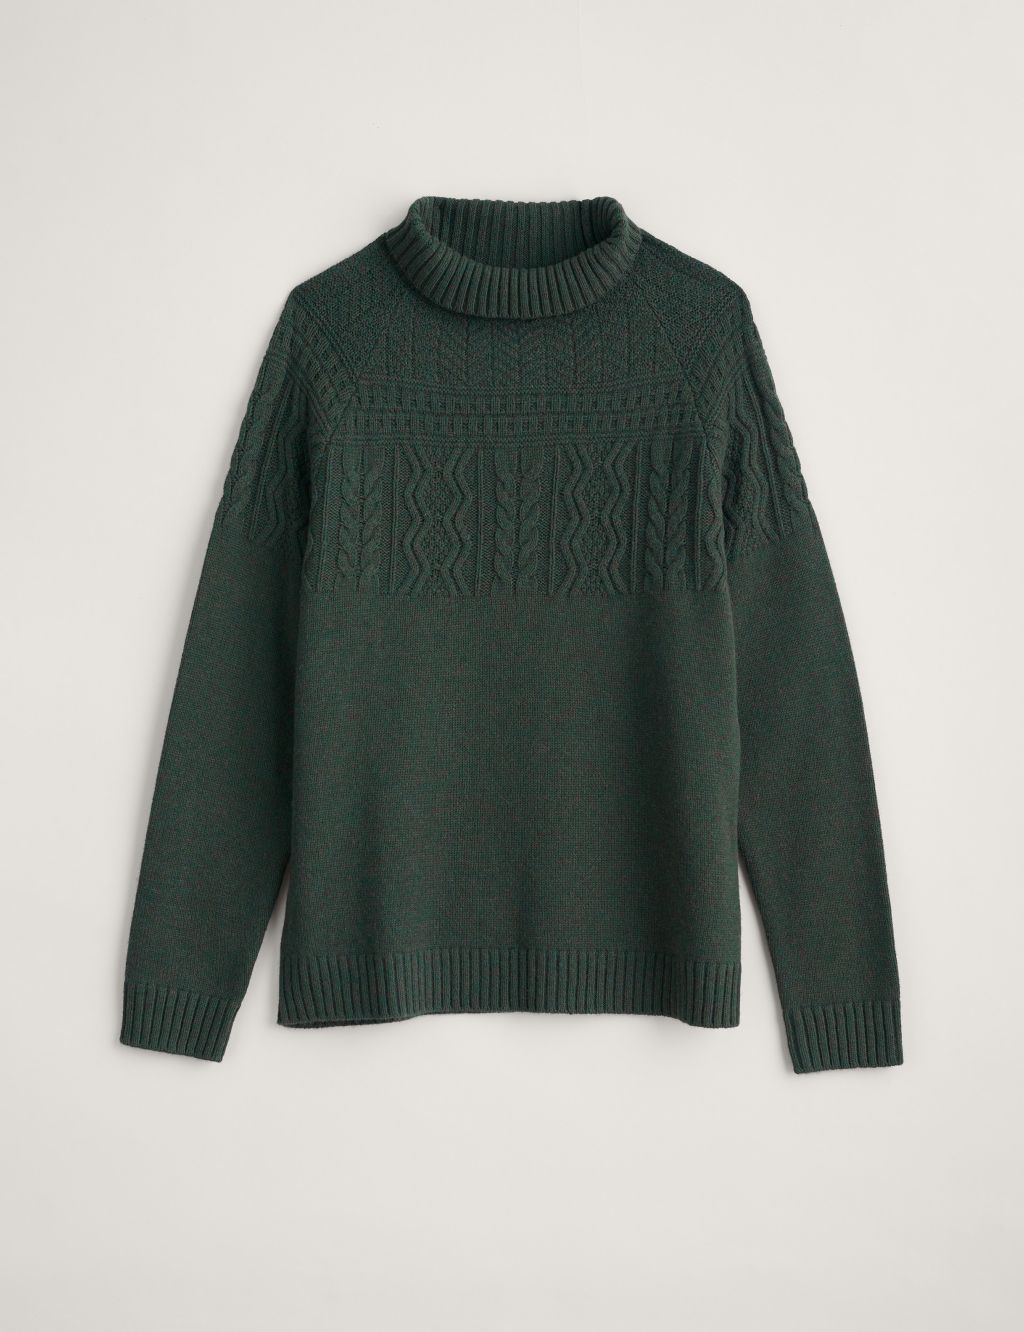 Wool Blend Cable Roll Neck Jumper image 2